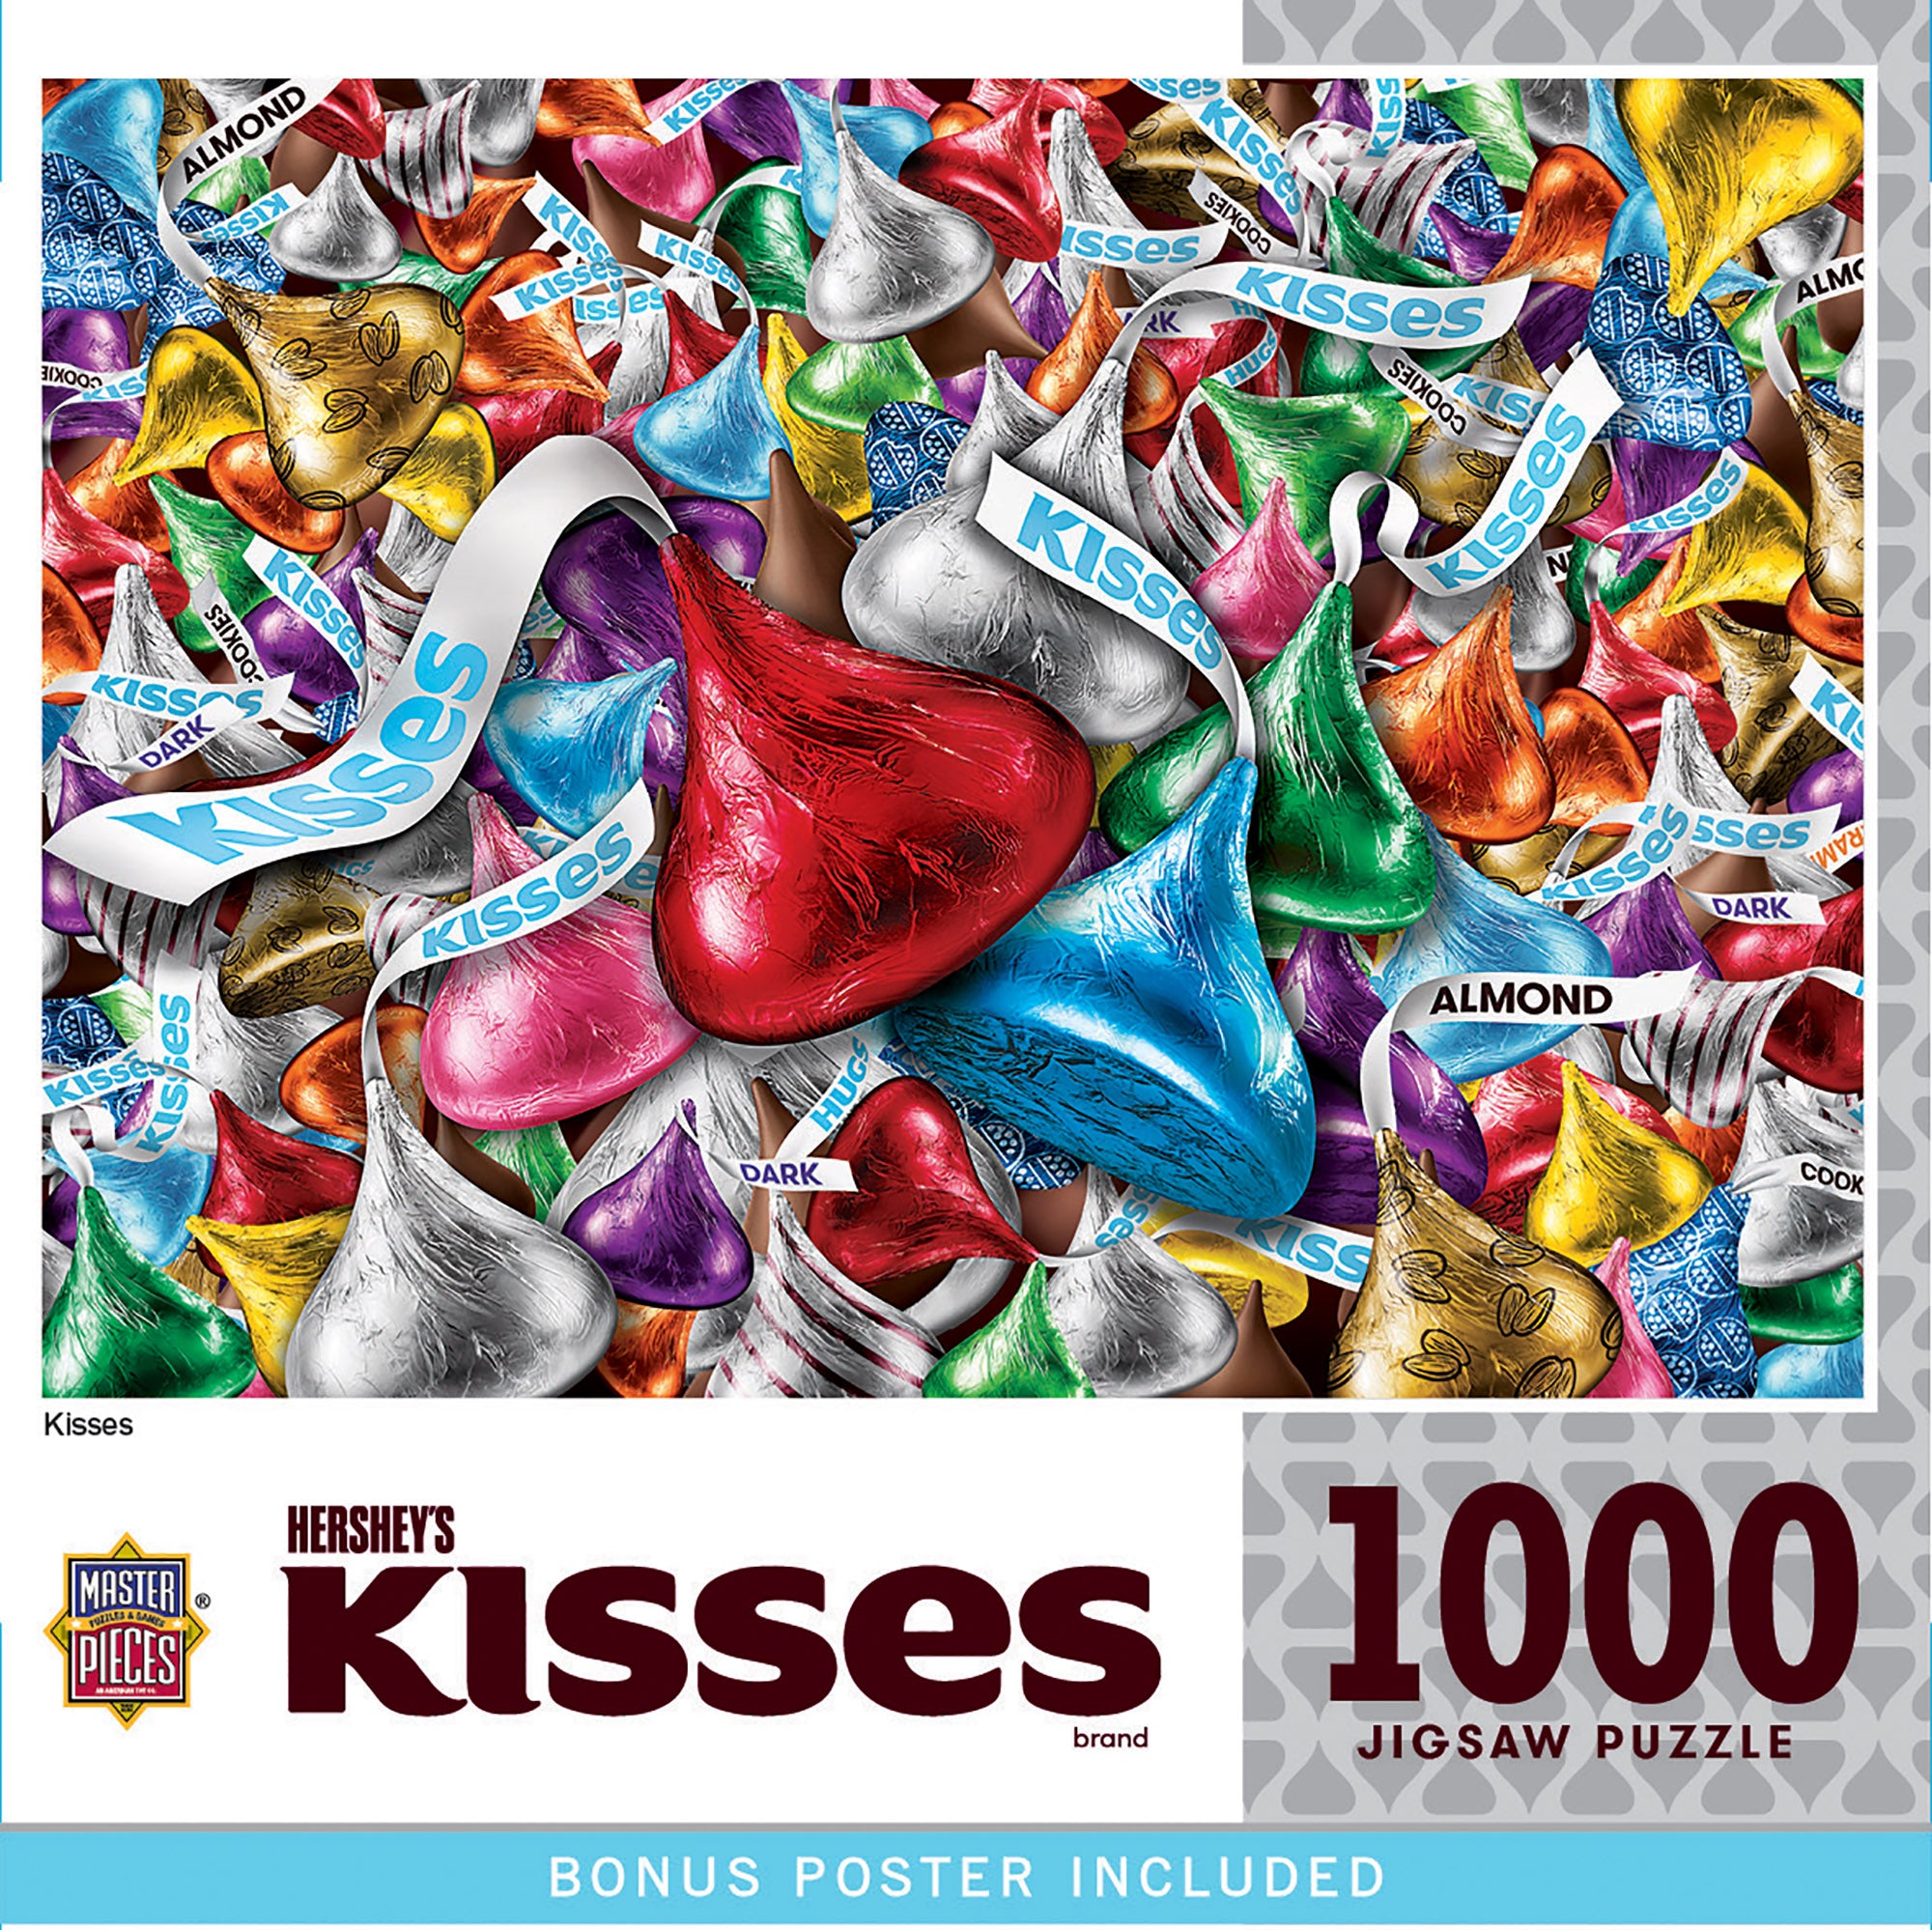 MasterPieces Hits Sweet Spot in Deal with HERSHEY’S Candy Brands